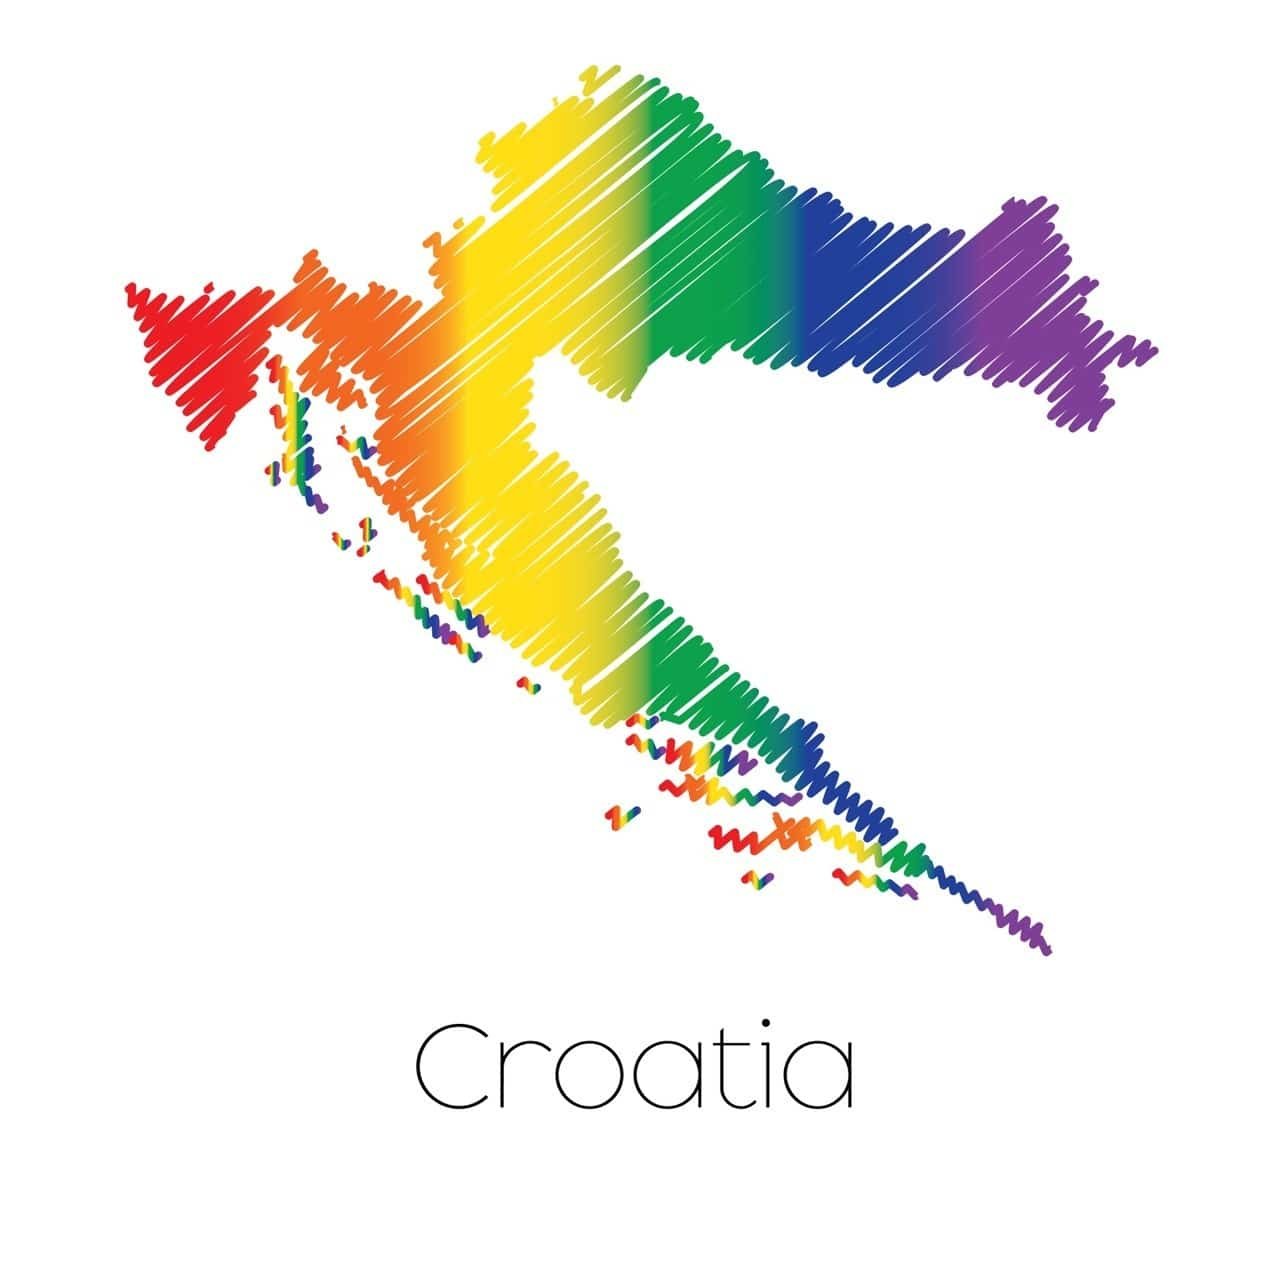 LGBT Coloured Scribbled Shape of the Country of Croatia